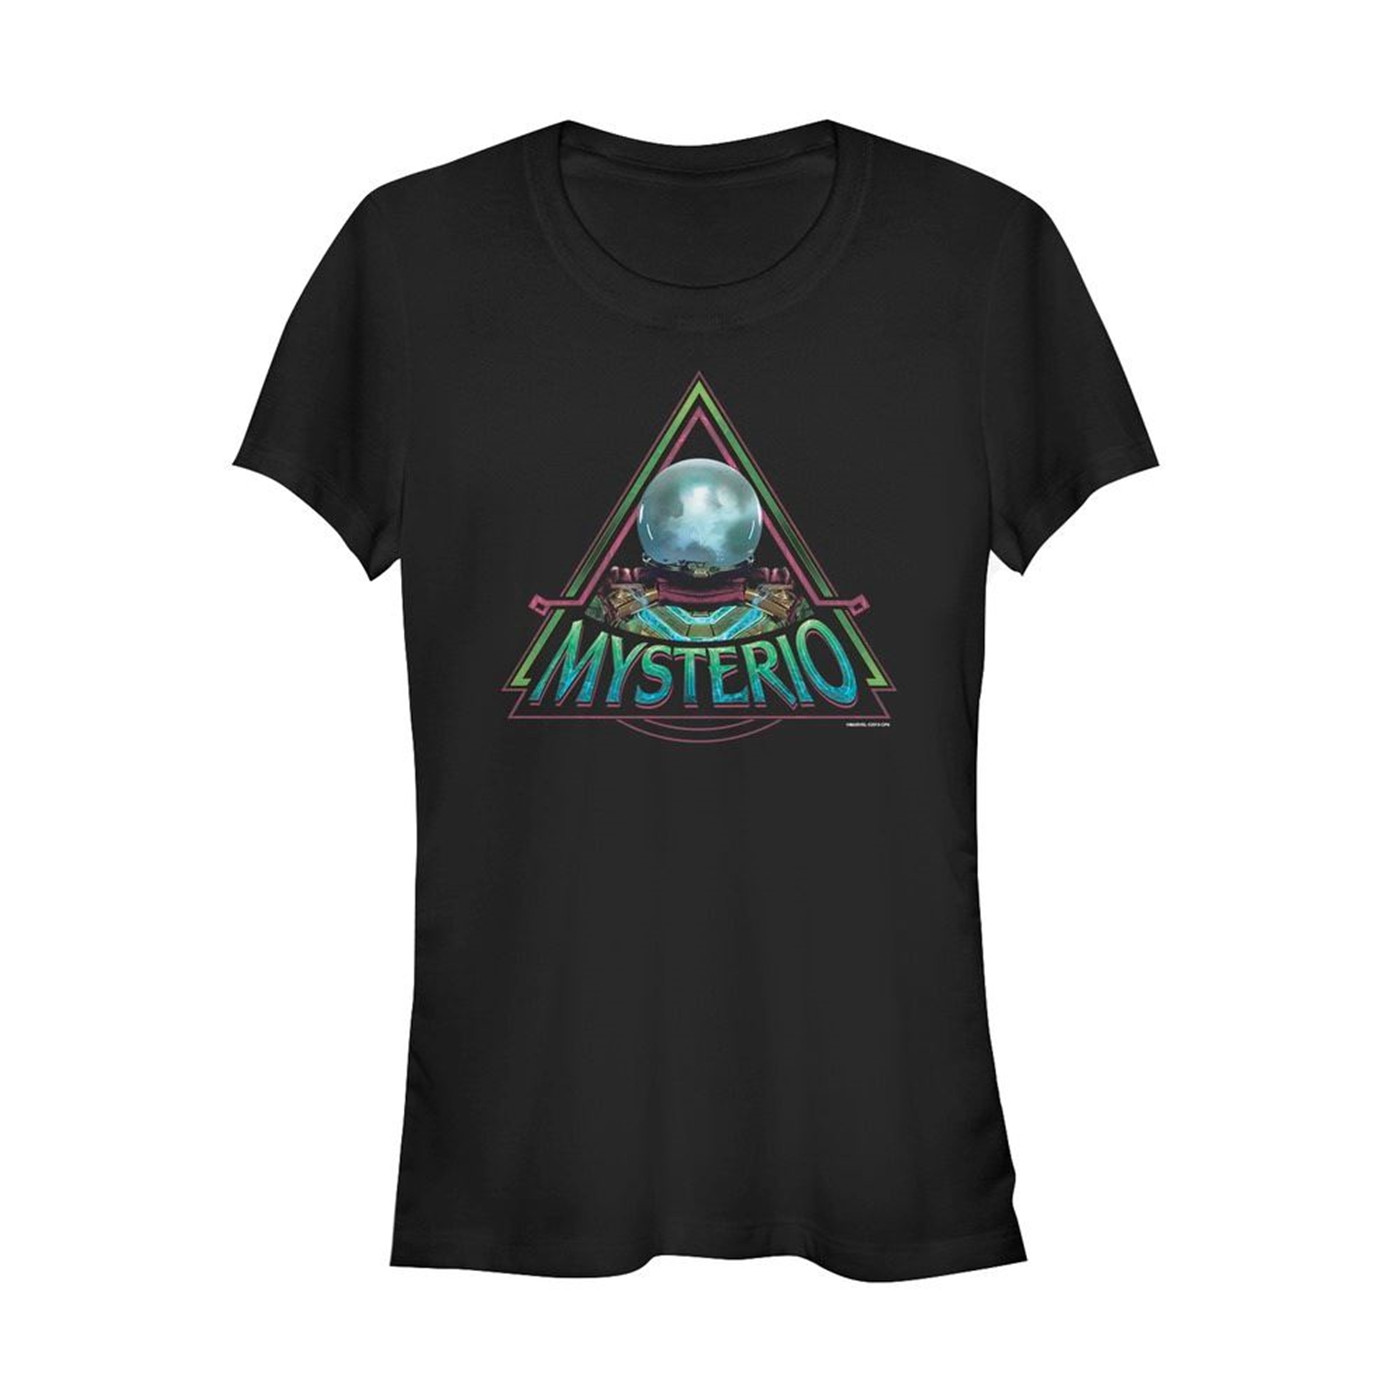 Spider-Man: Far From Home Mysterio Crystal Women's T-Shirt